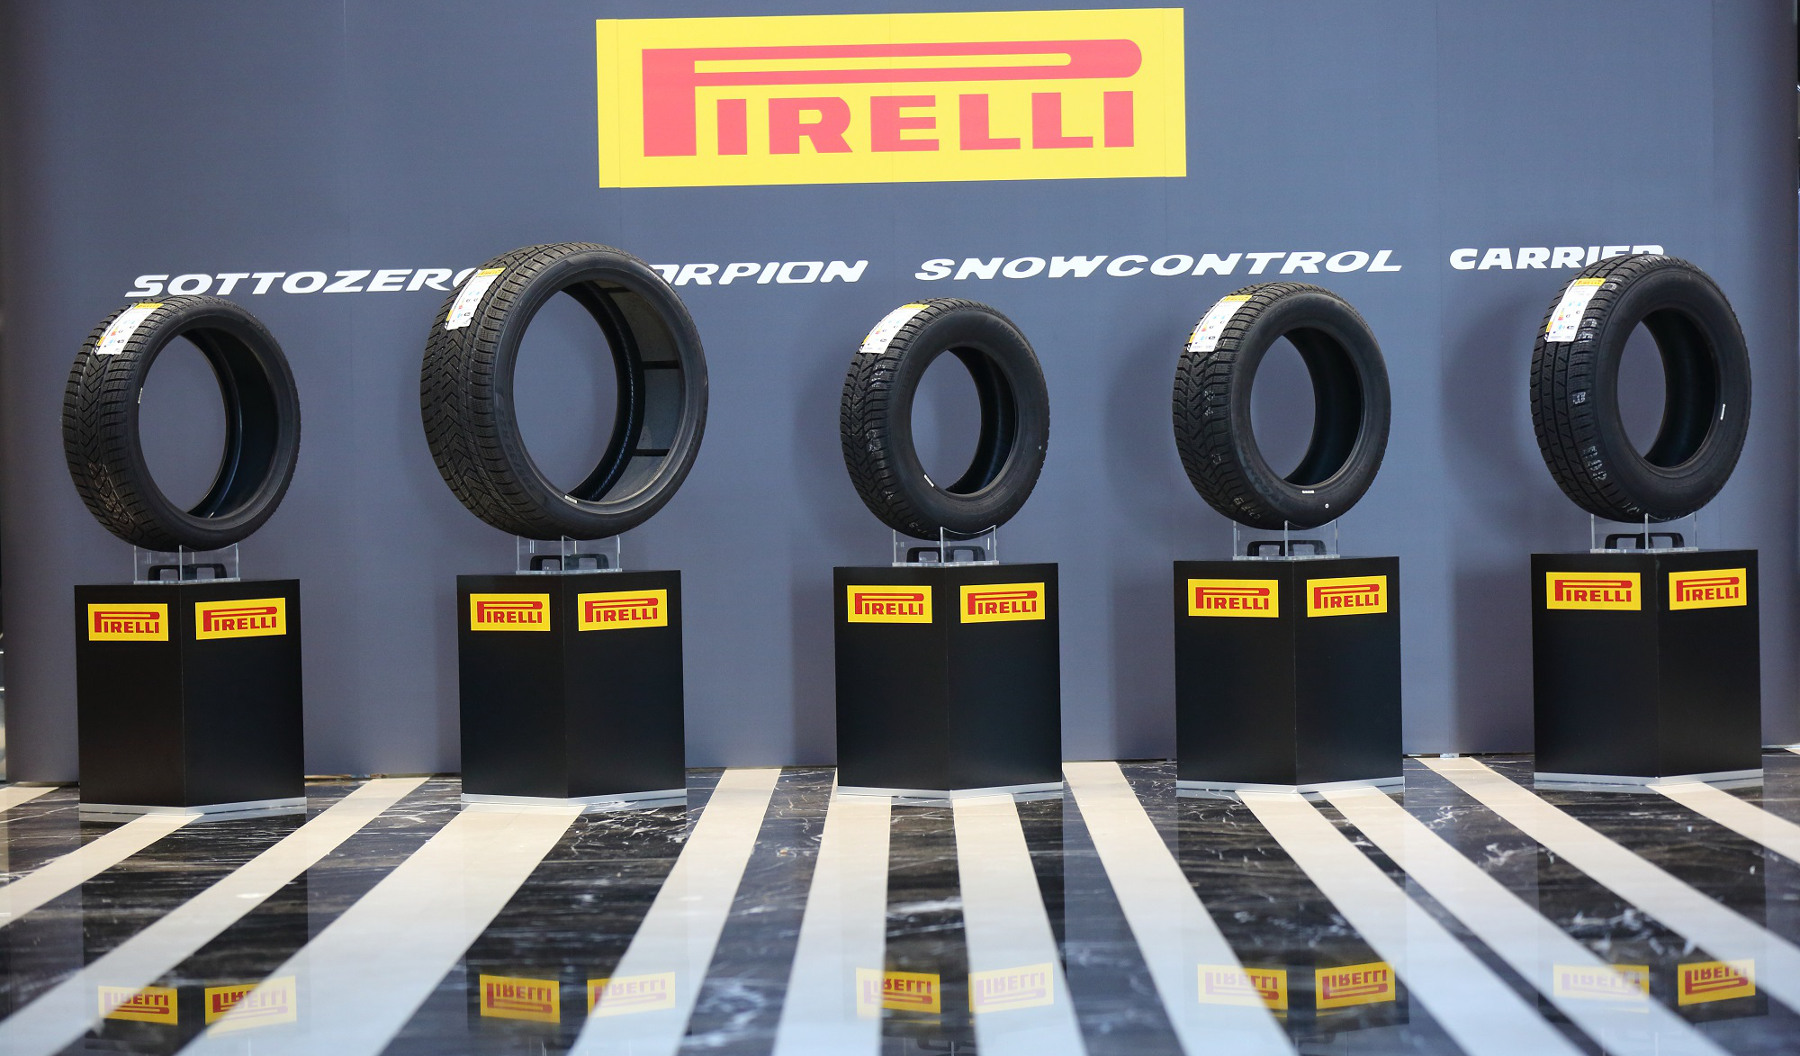 Erdemtaş Makine, the Choice of Pirelli Tires in 5 Countries